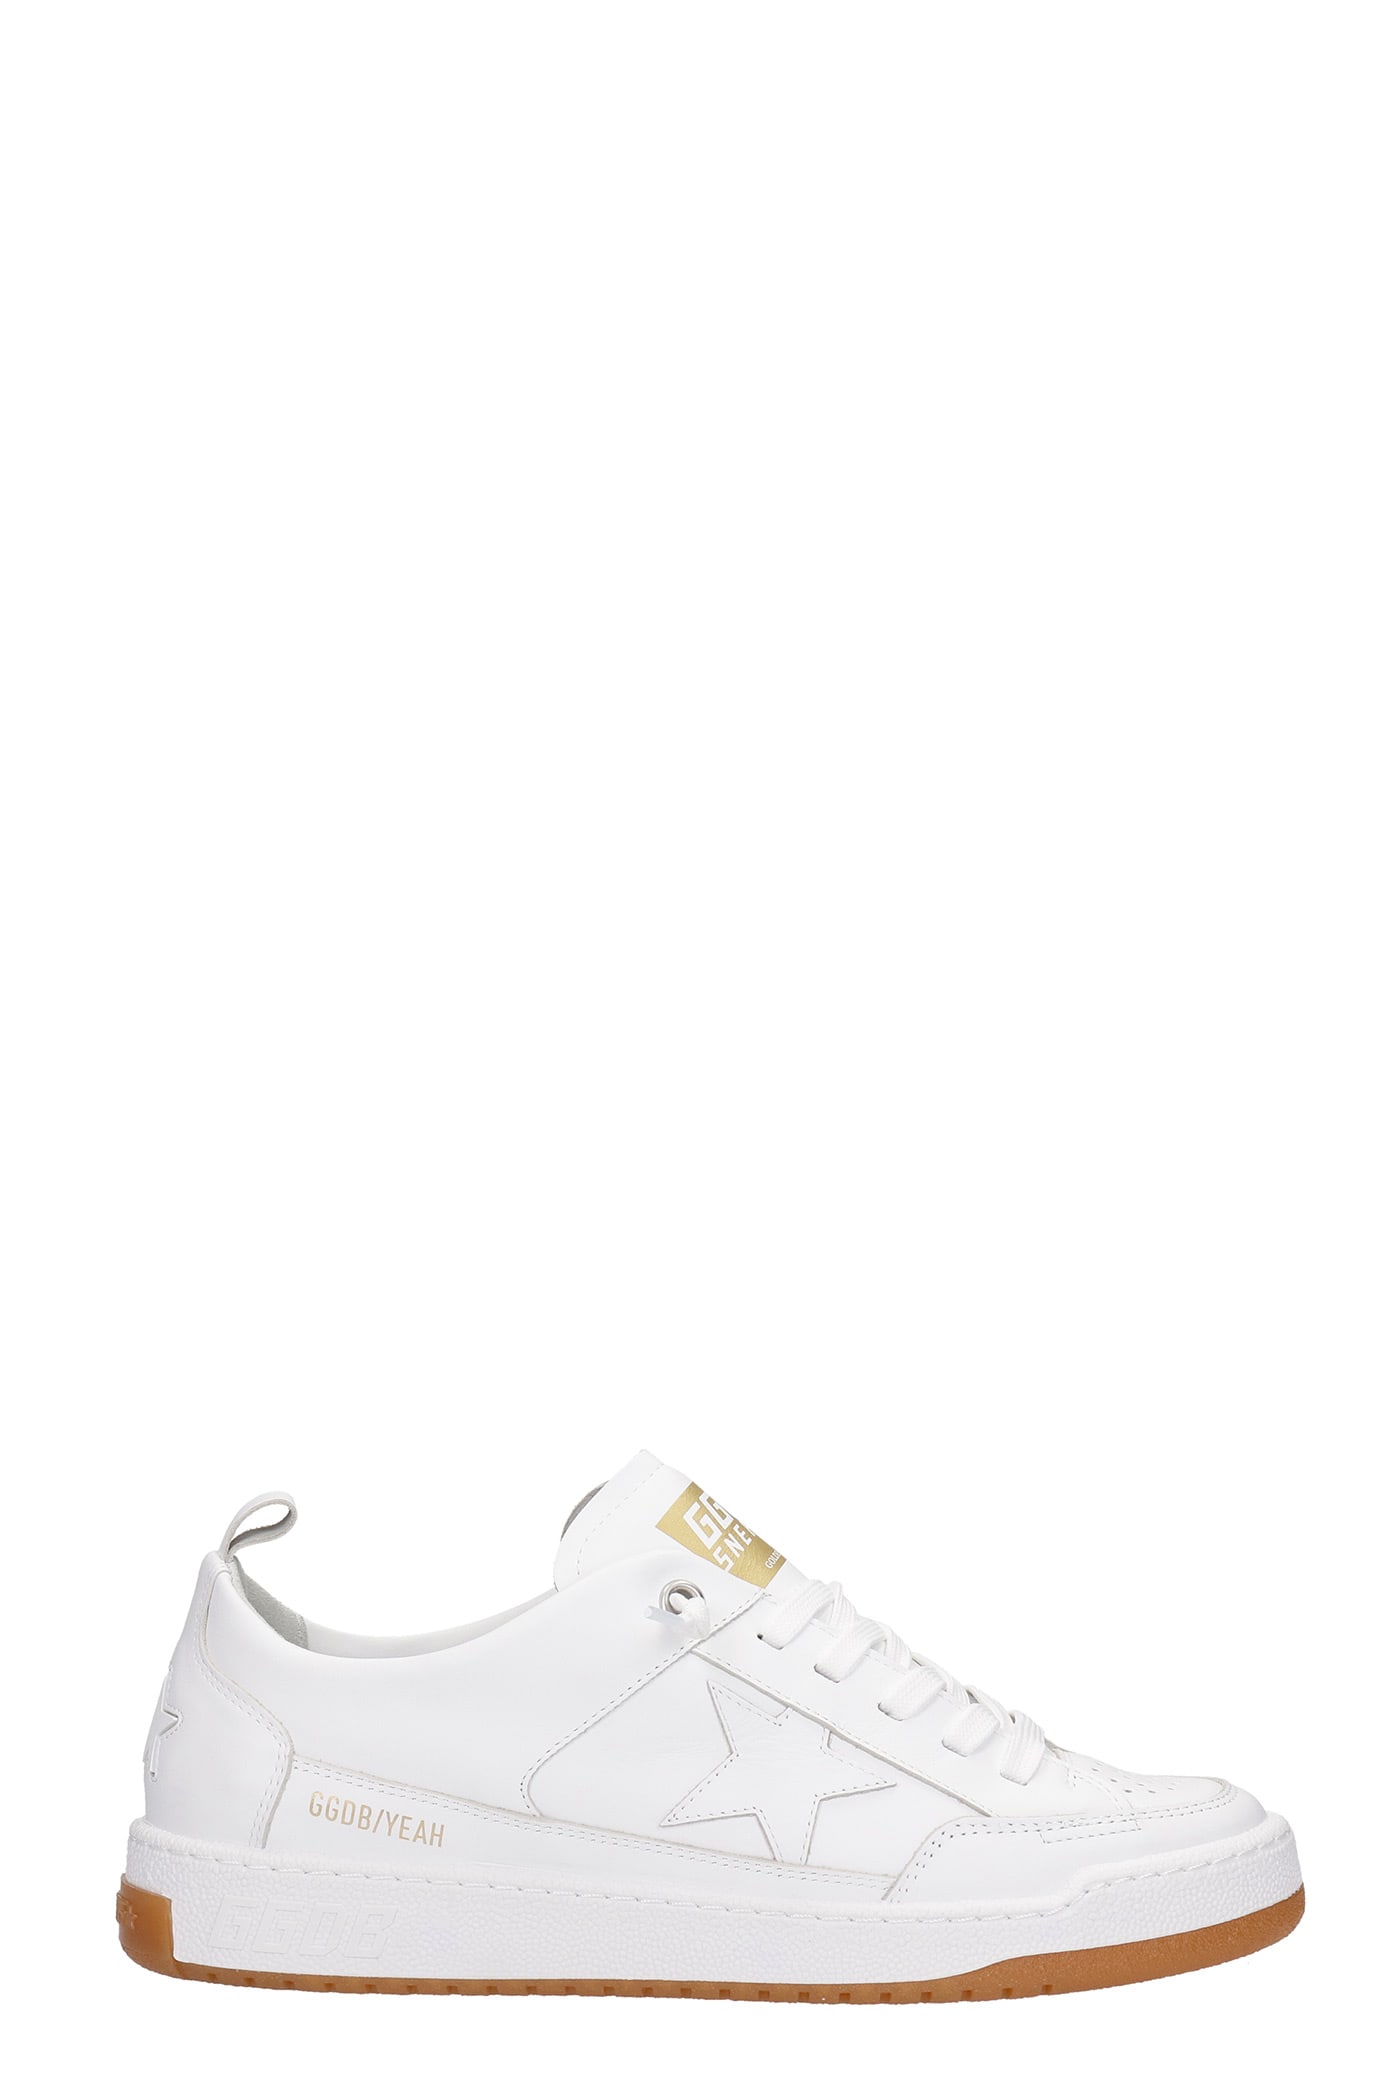 Golden Goose Yeah Sneakers In White Leather